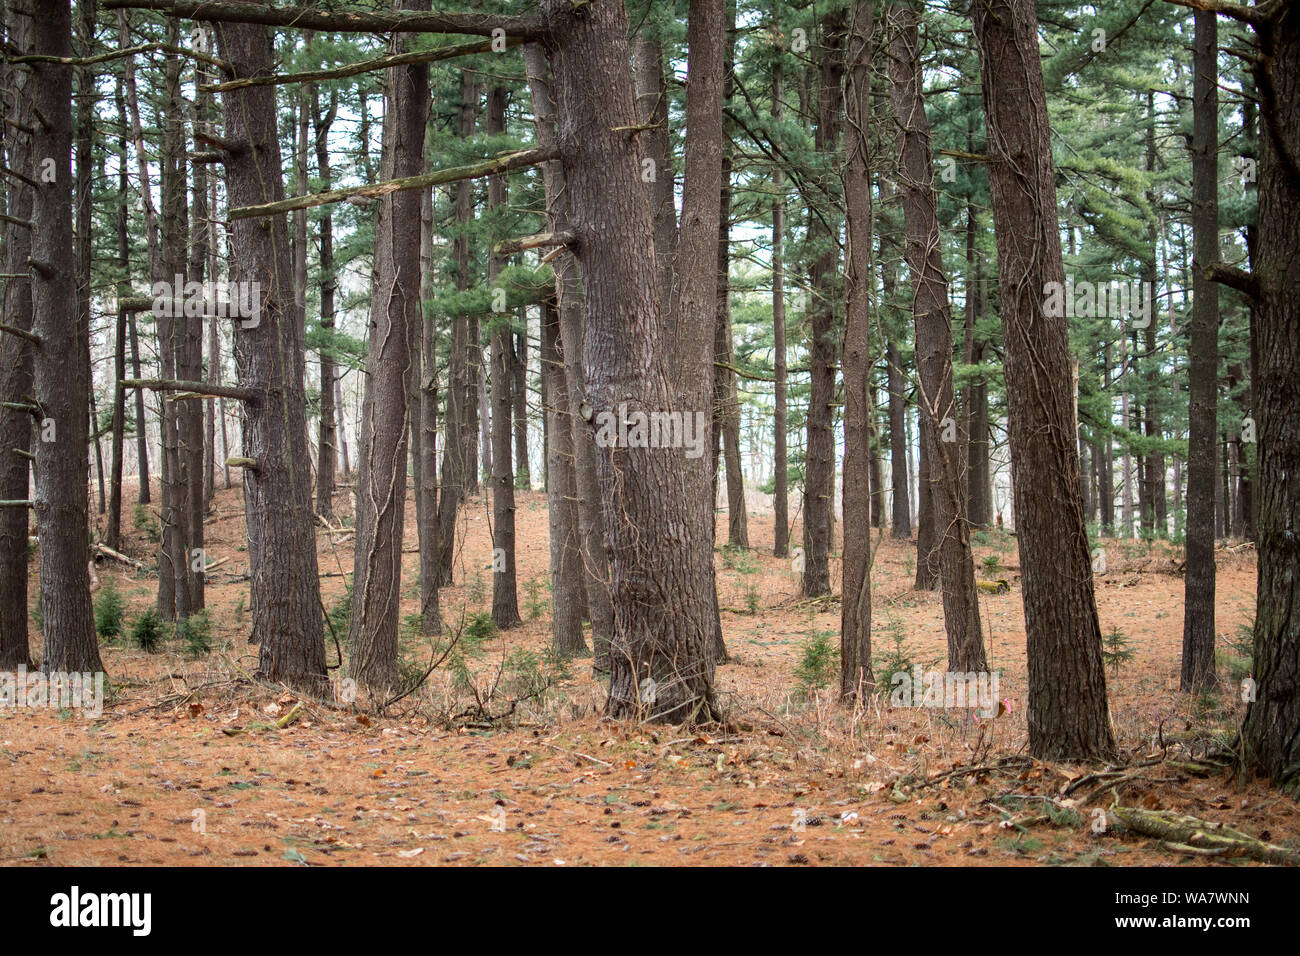 Beautiful pine forest with old and new pine trees in early spring Stock Photo